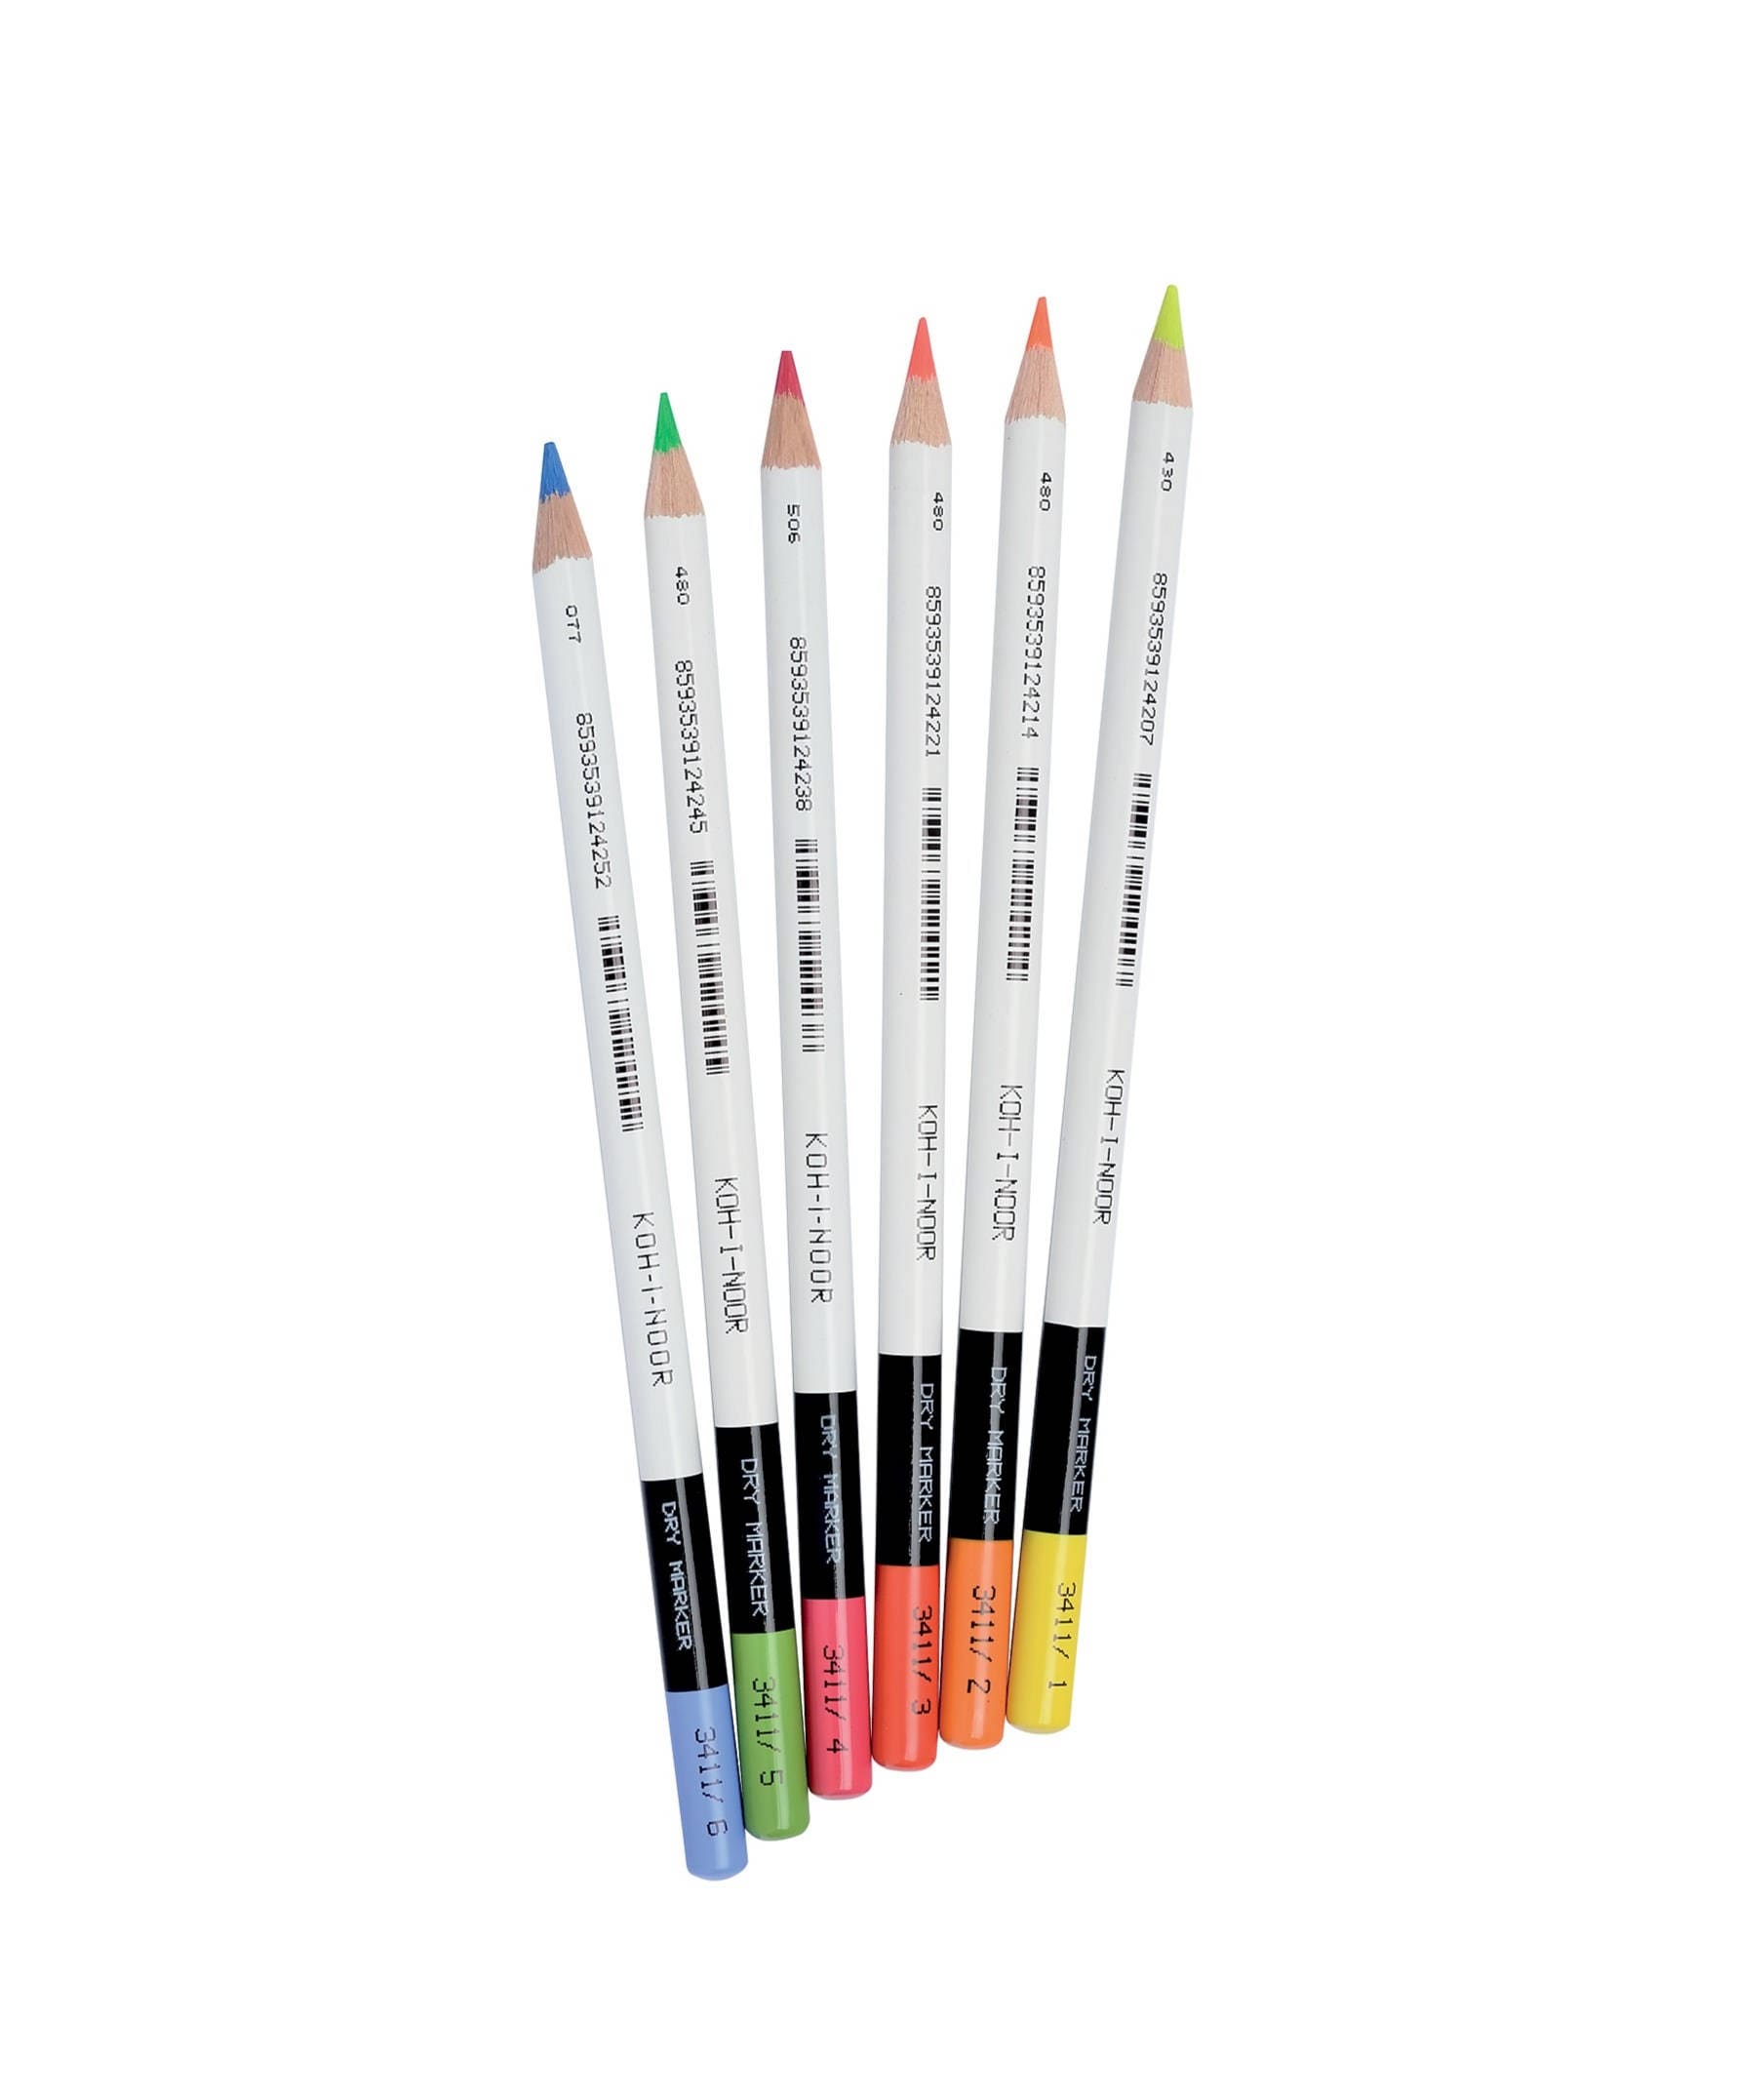 Dry Highlighter Colored Pencil Set Koh-i-noor 3411 3415 Marker Neon Cryon  Pink Red Green Blue Yellow Orange Text Highlighting Drawing 